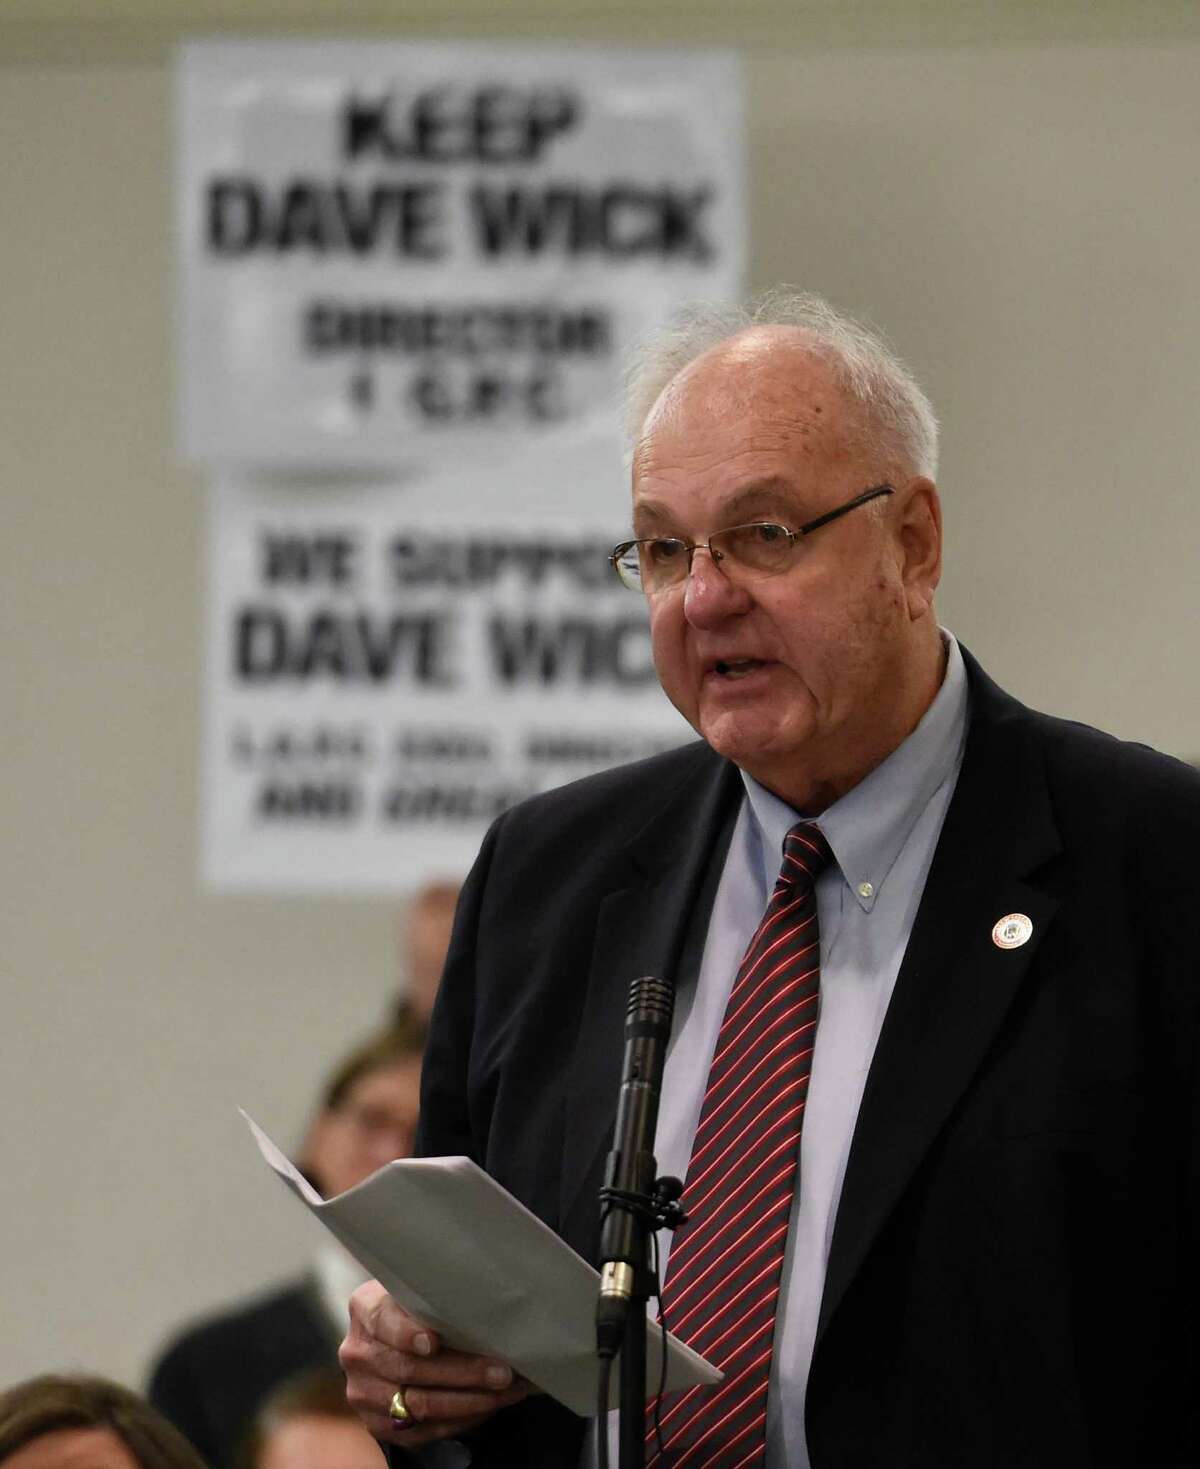 Lake George Mayor Robert Blais speaks in support of Dave Wick during an overflow turnout in the conference room at the Fort William Henry Conference Center Tuesday morning Nov. 25, 2014 in Lake George, N.Y. for a meeting of the Lake George Park Commission. Wick was put on paid leave recently much to the dismay of most all of the attendees to this commission meeting. (Skip Dickstein/Times Union)